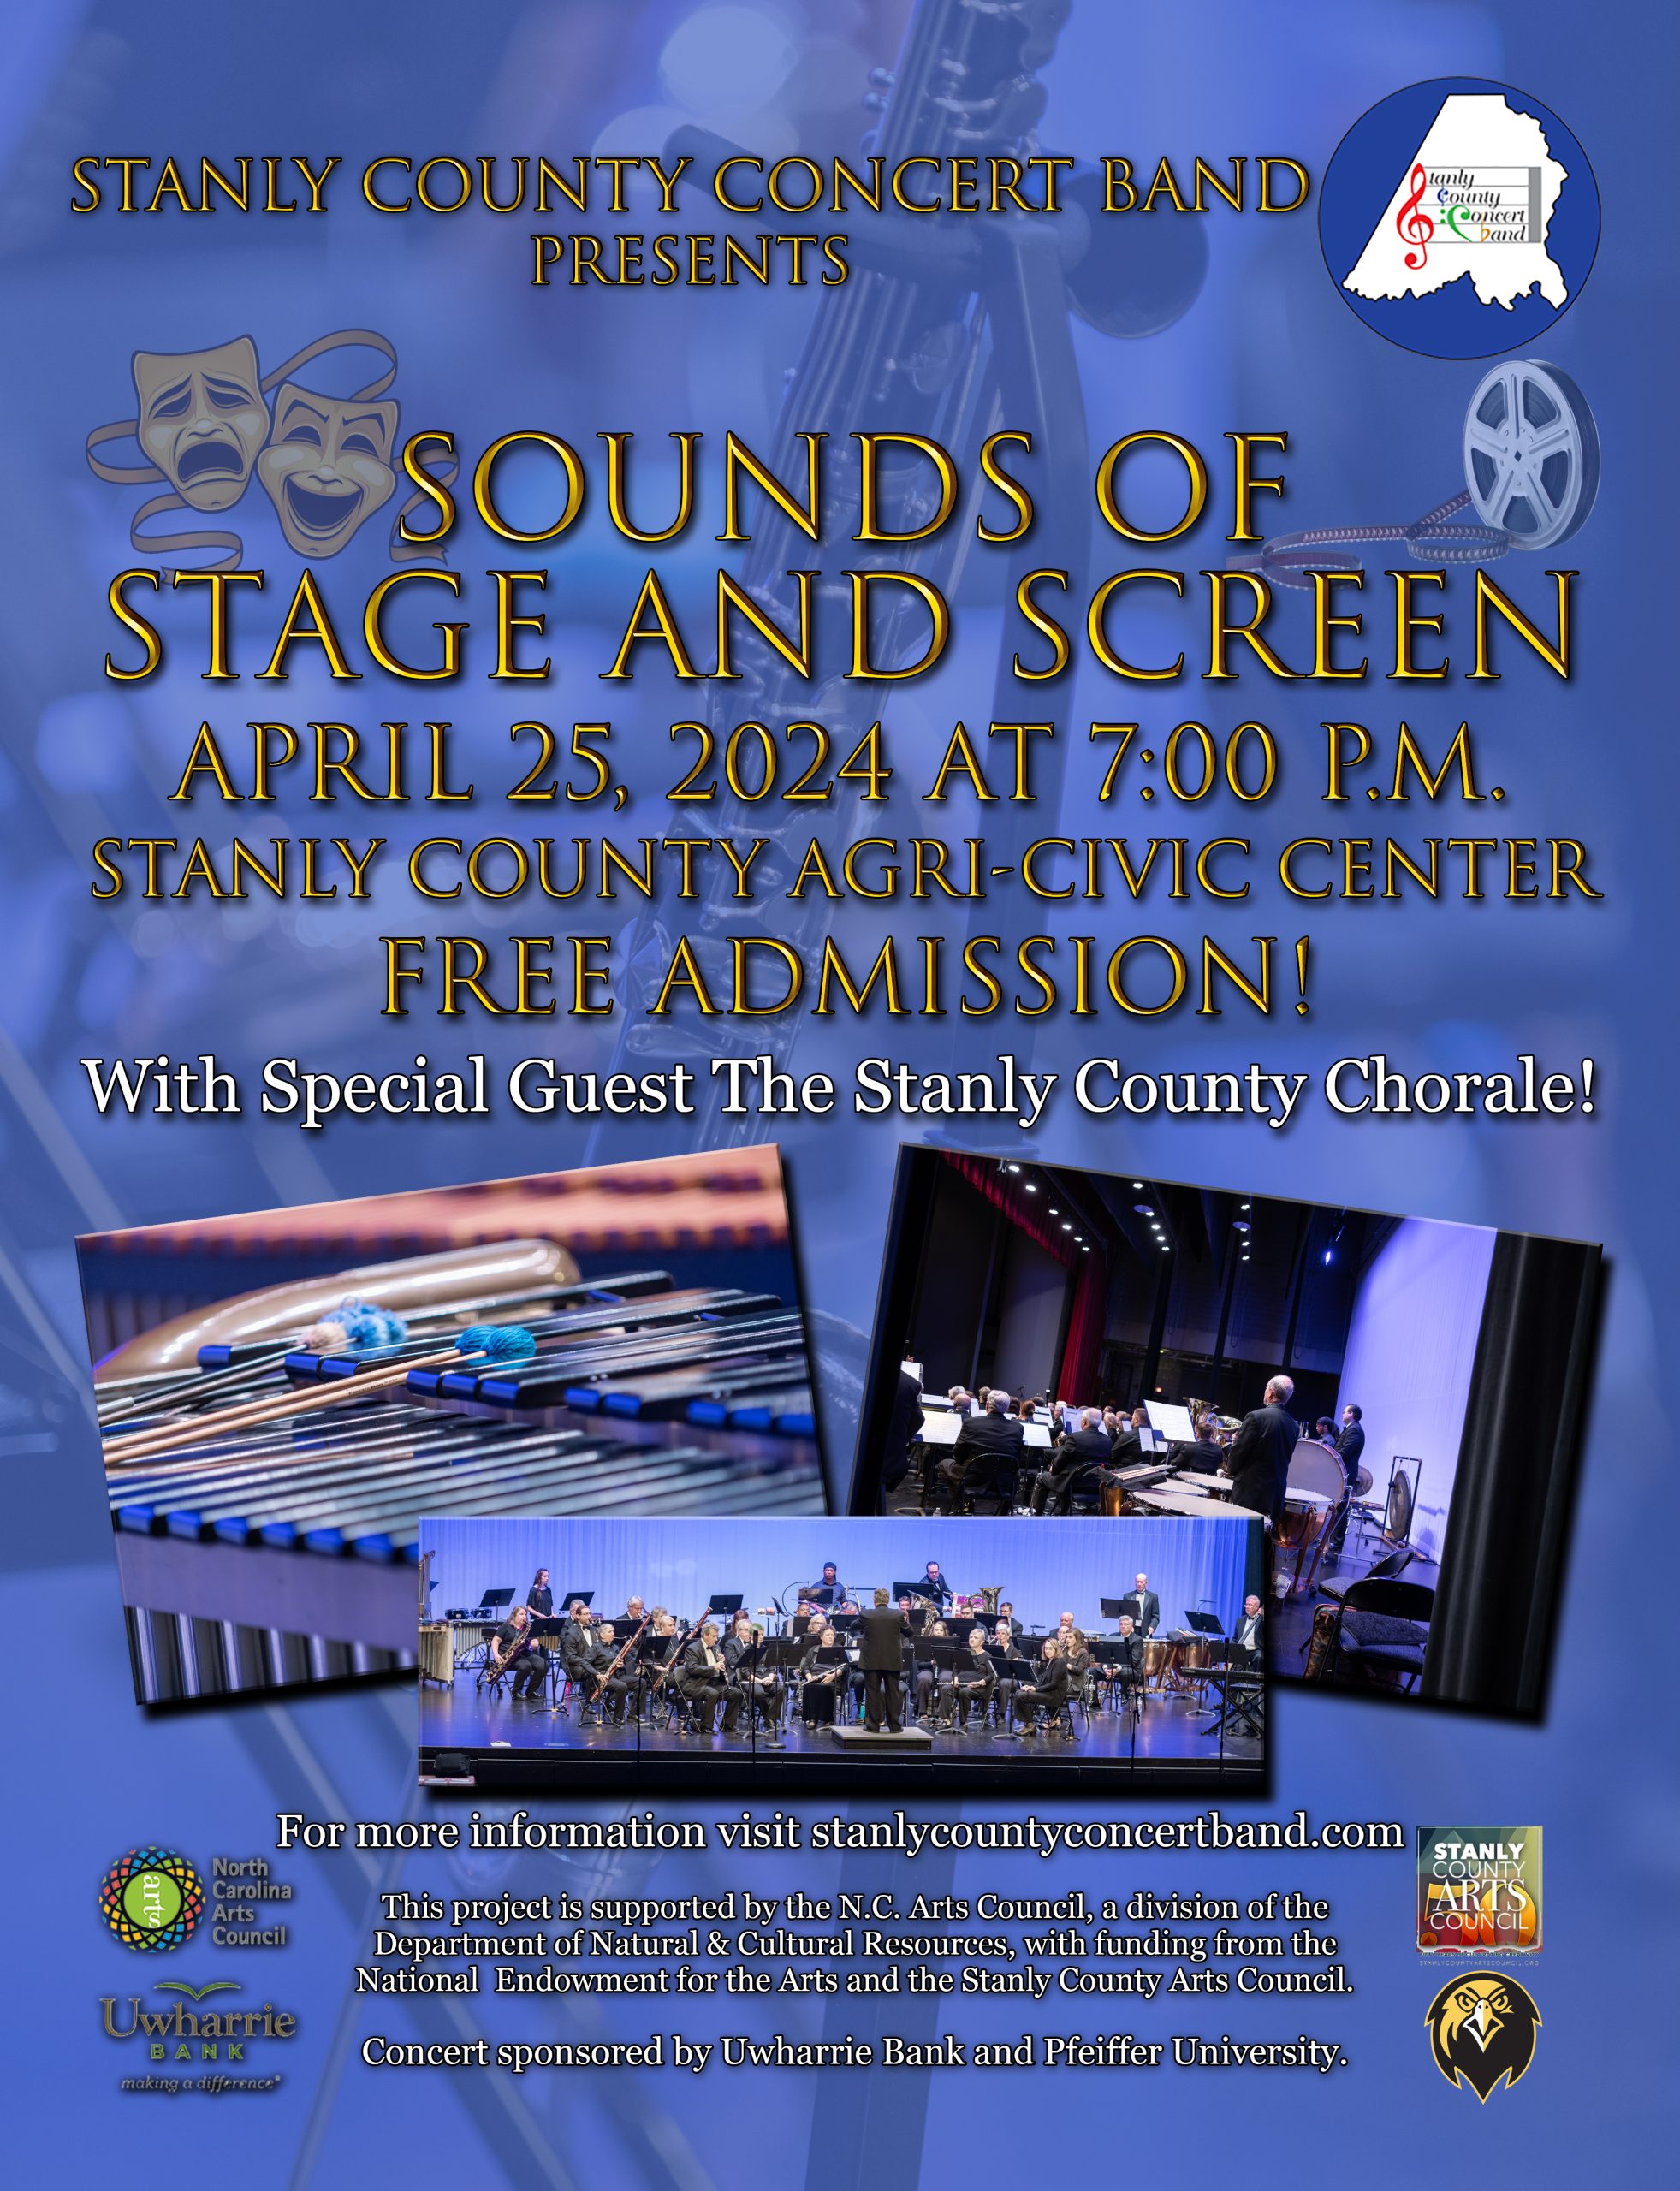 Stanly County Concert Band presents Sounds of Stage and Screen